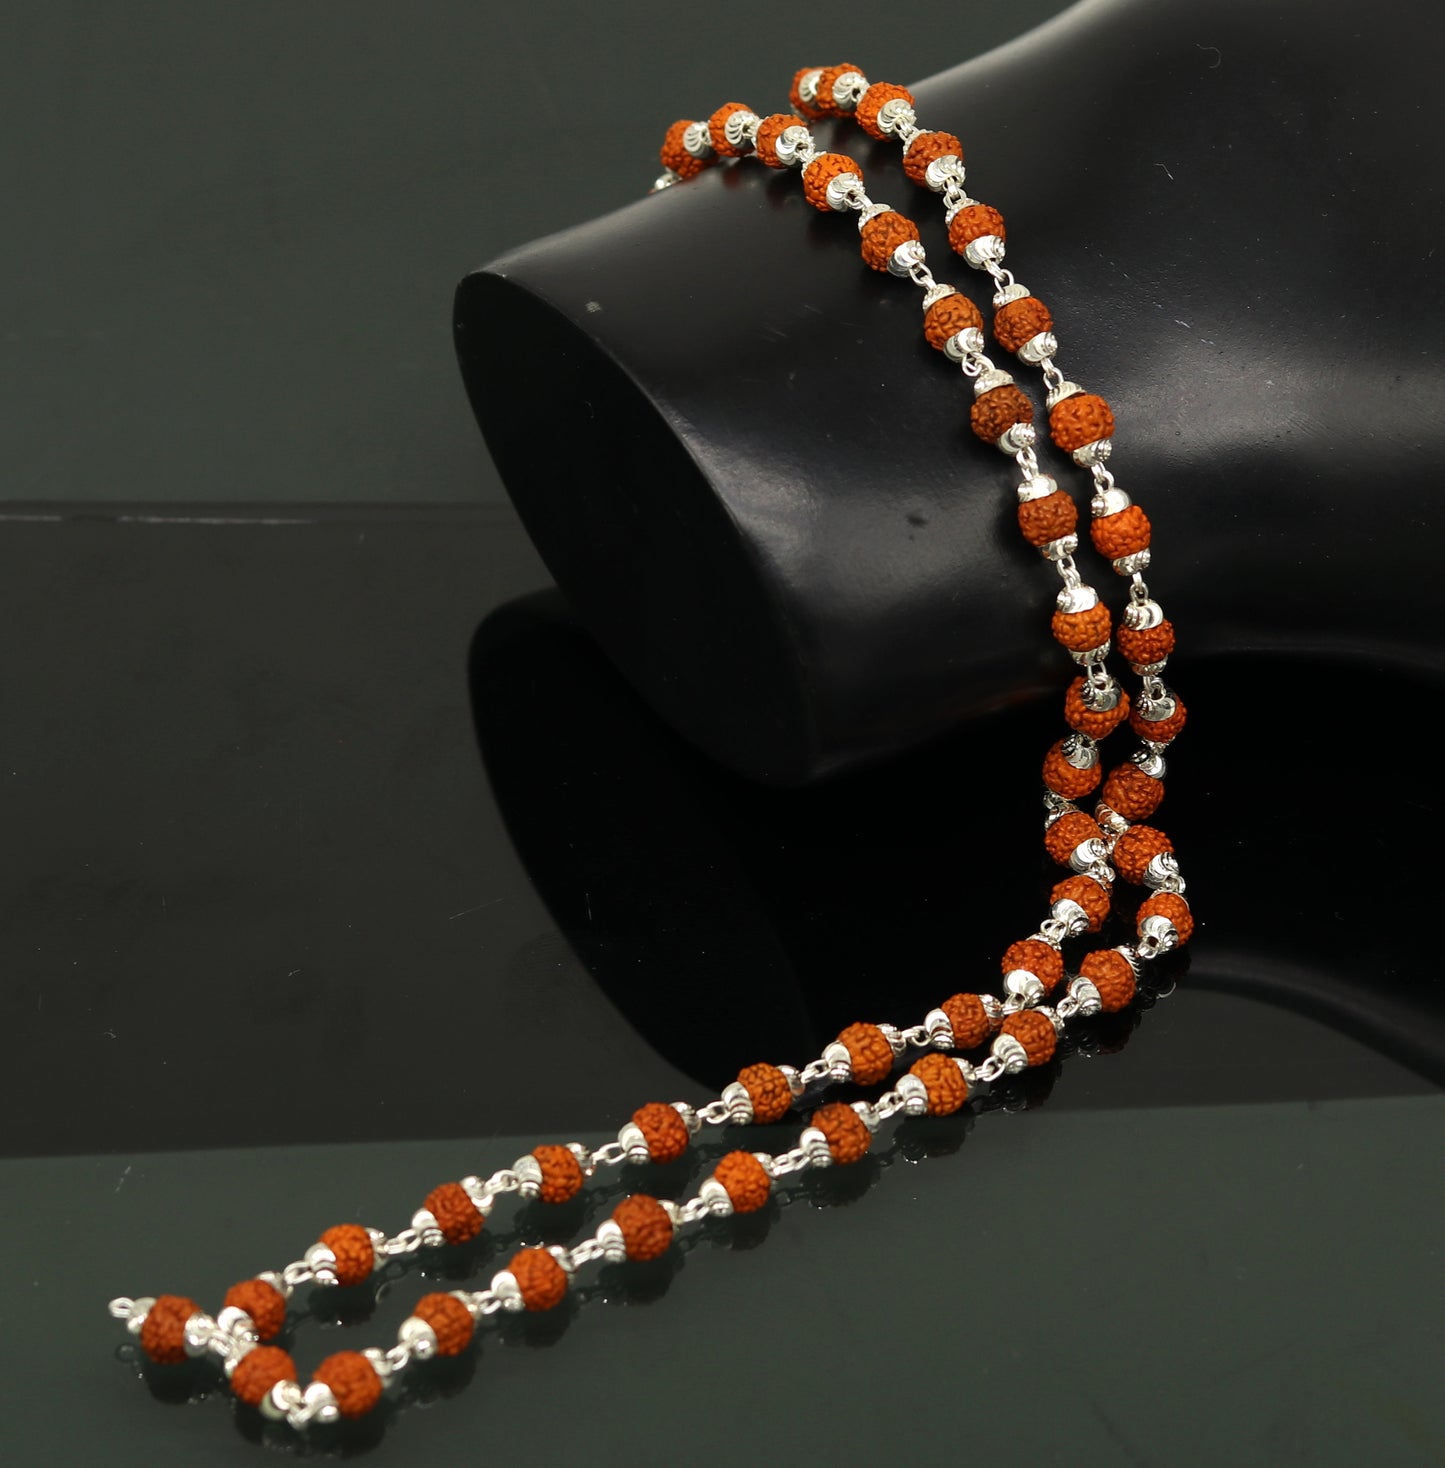 Handmade Sterling silver gorgeous natural Rudraksh beads 23" long 54 beads japp mala necklace chanting necklace praying mantra ch79 - TRIBAL ORNAMENTS